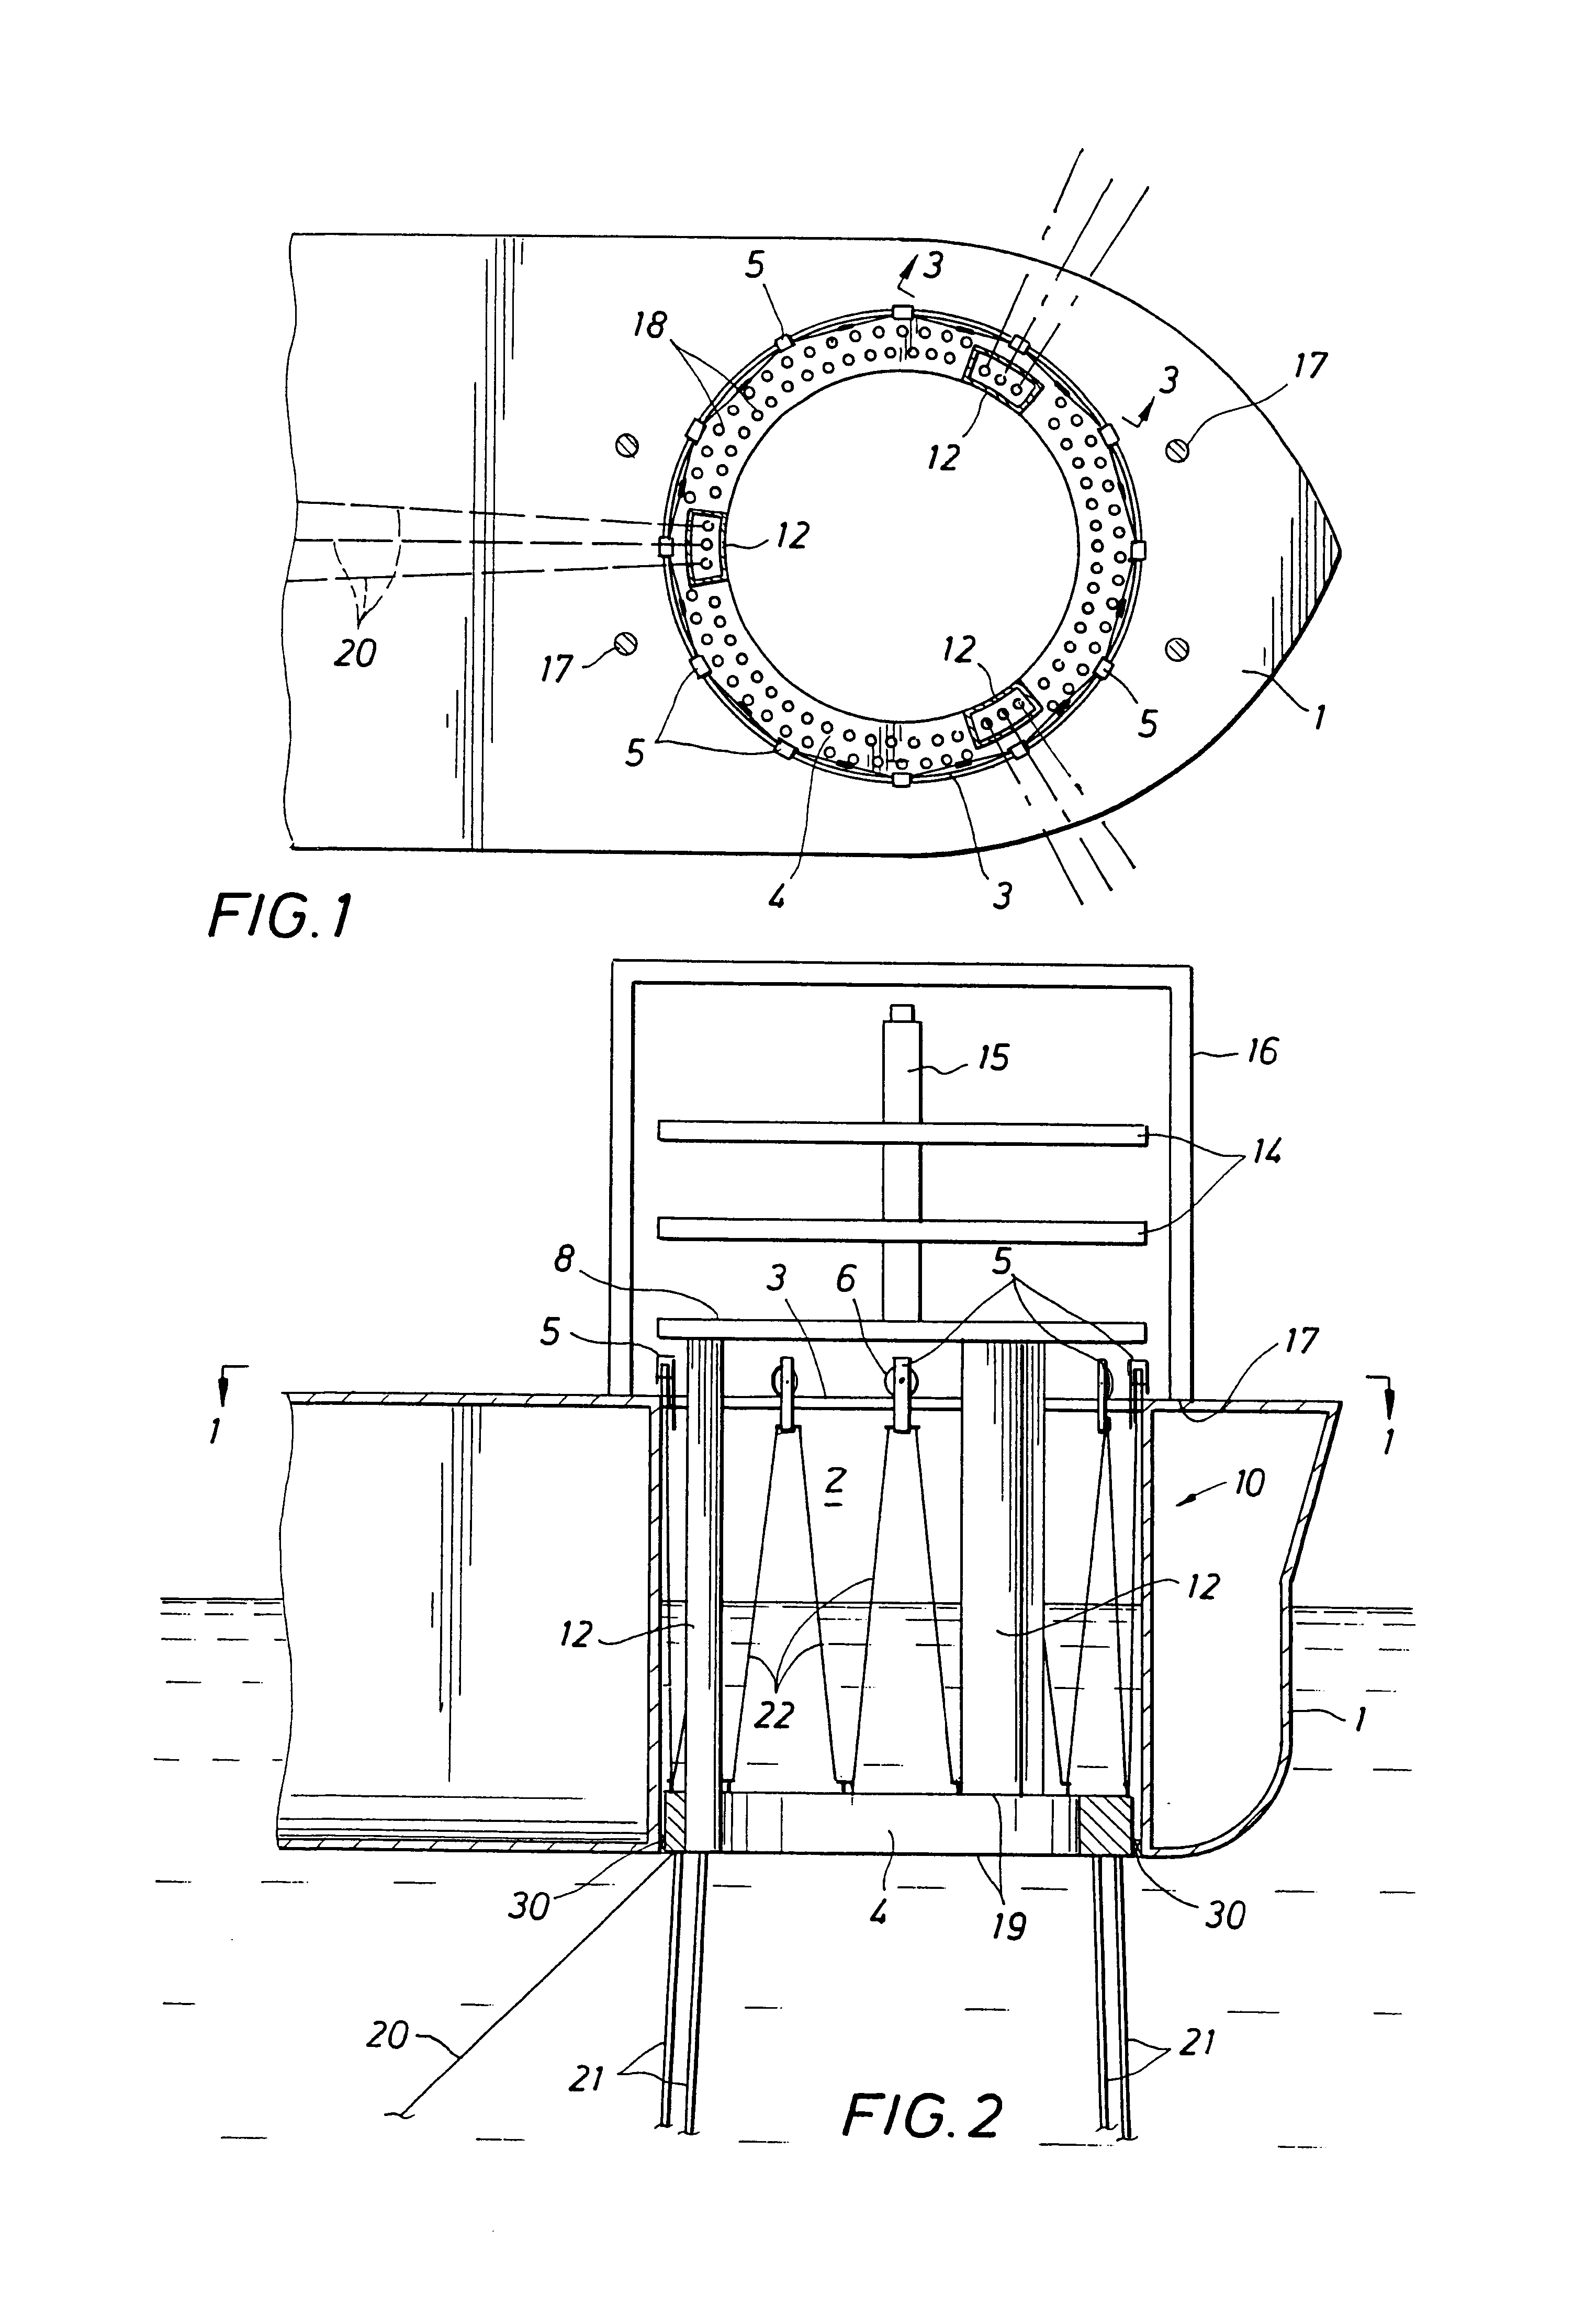 Single point mooring with suspension turret